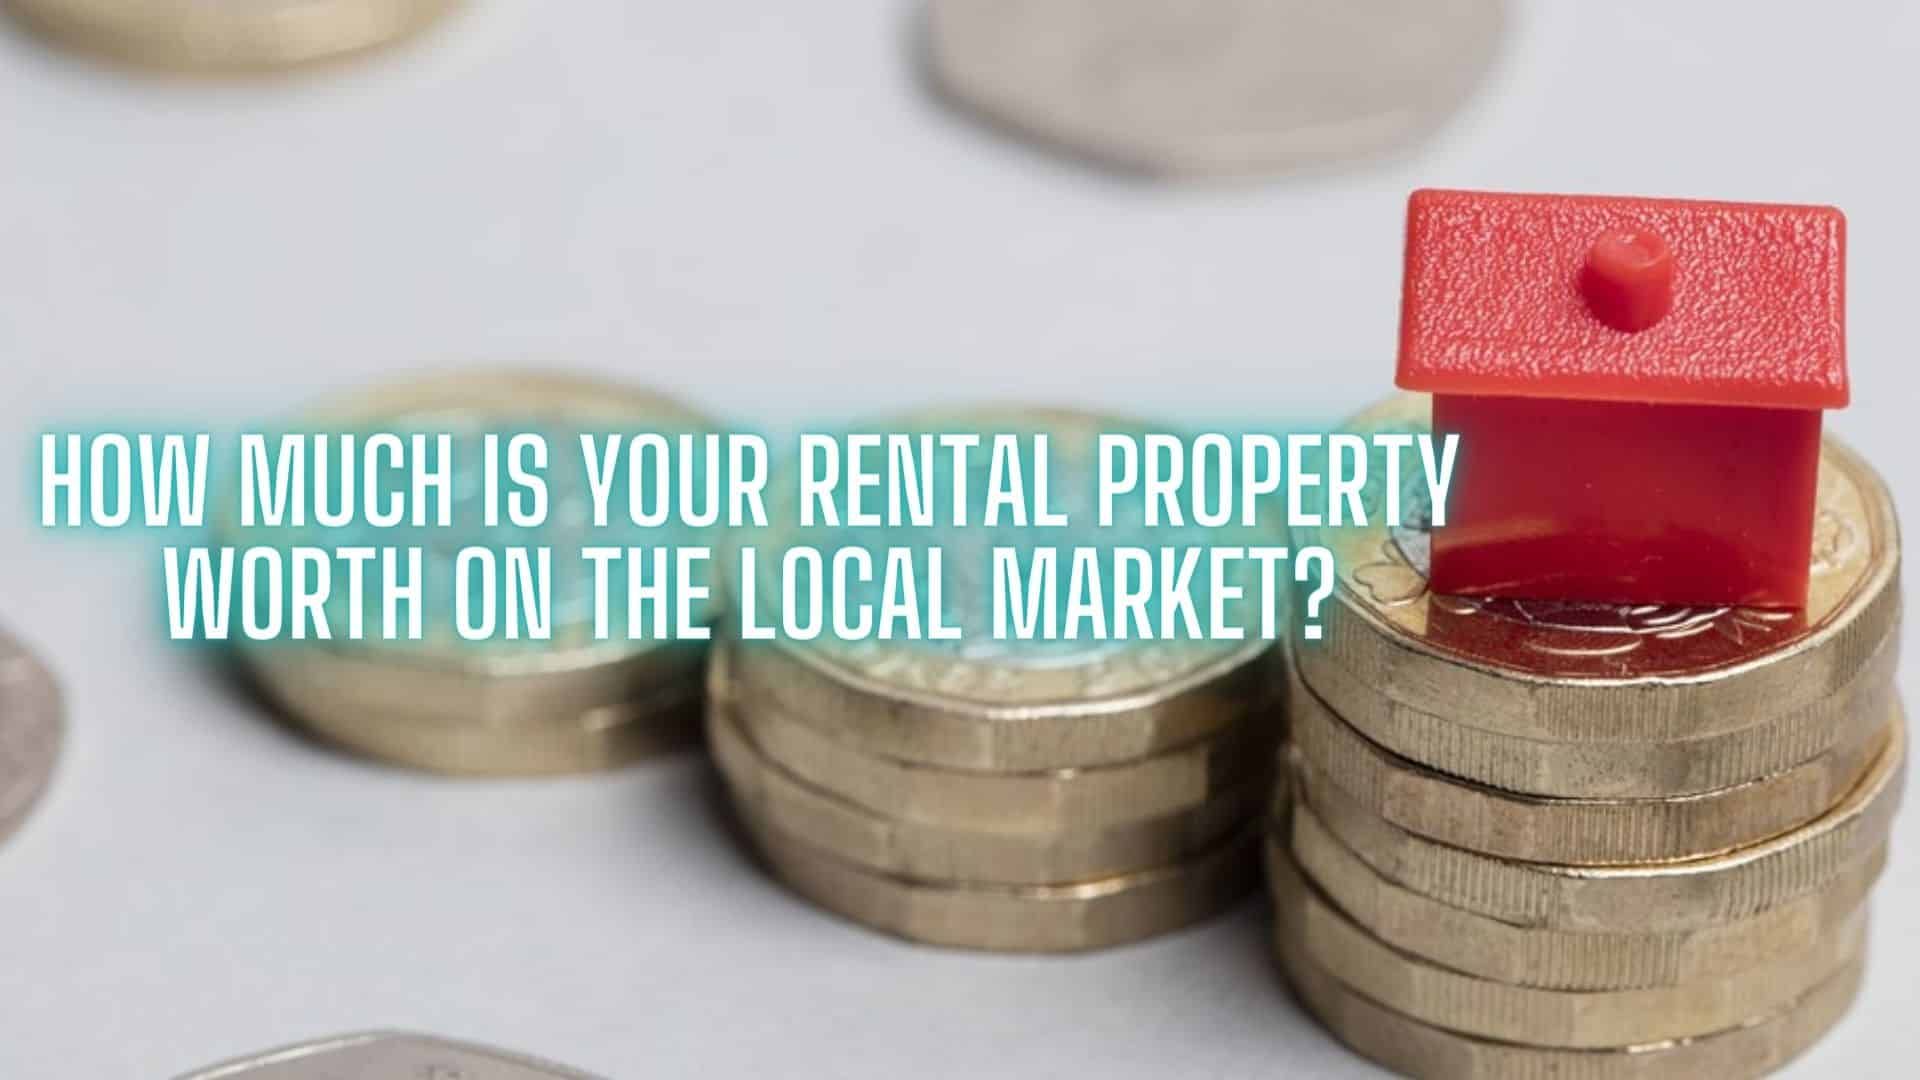 How Much Is Your Rental Property Worth On The Local Market?